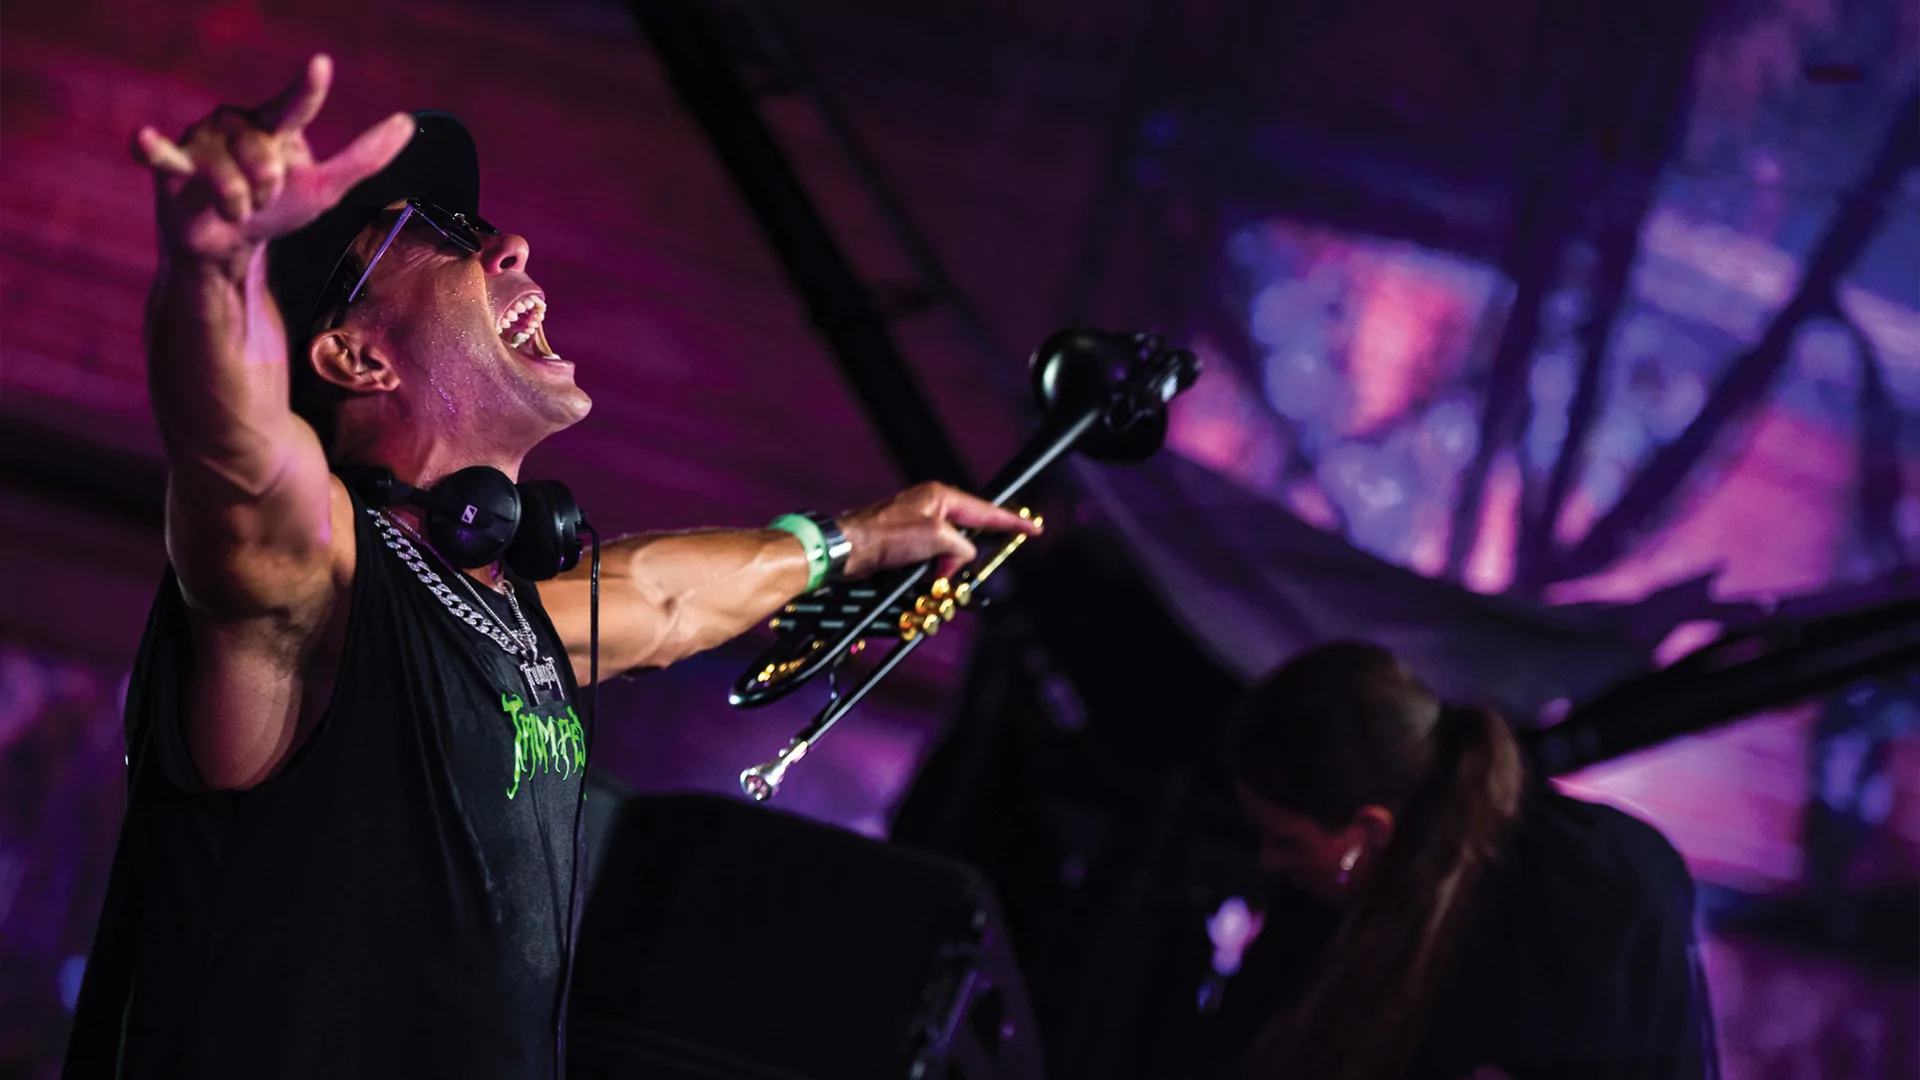 Photo of Timmy Trumpet performing live with purple lights